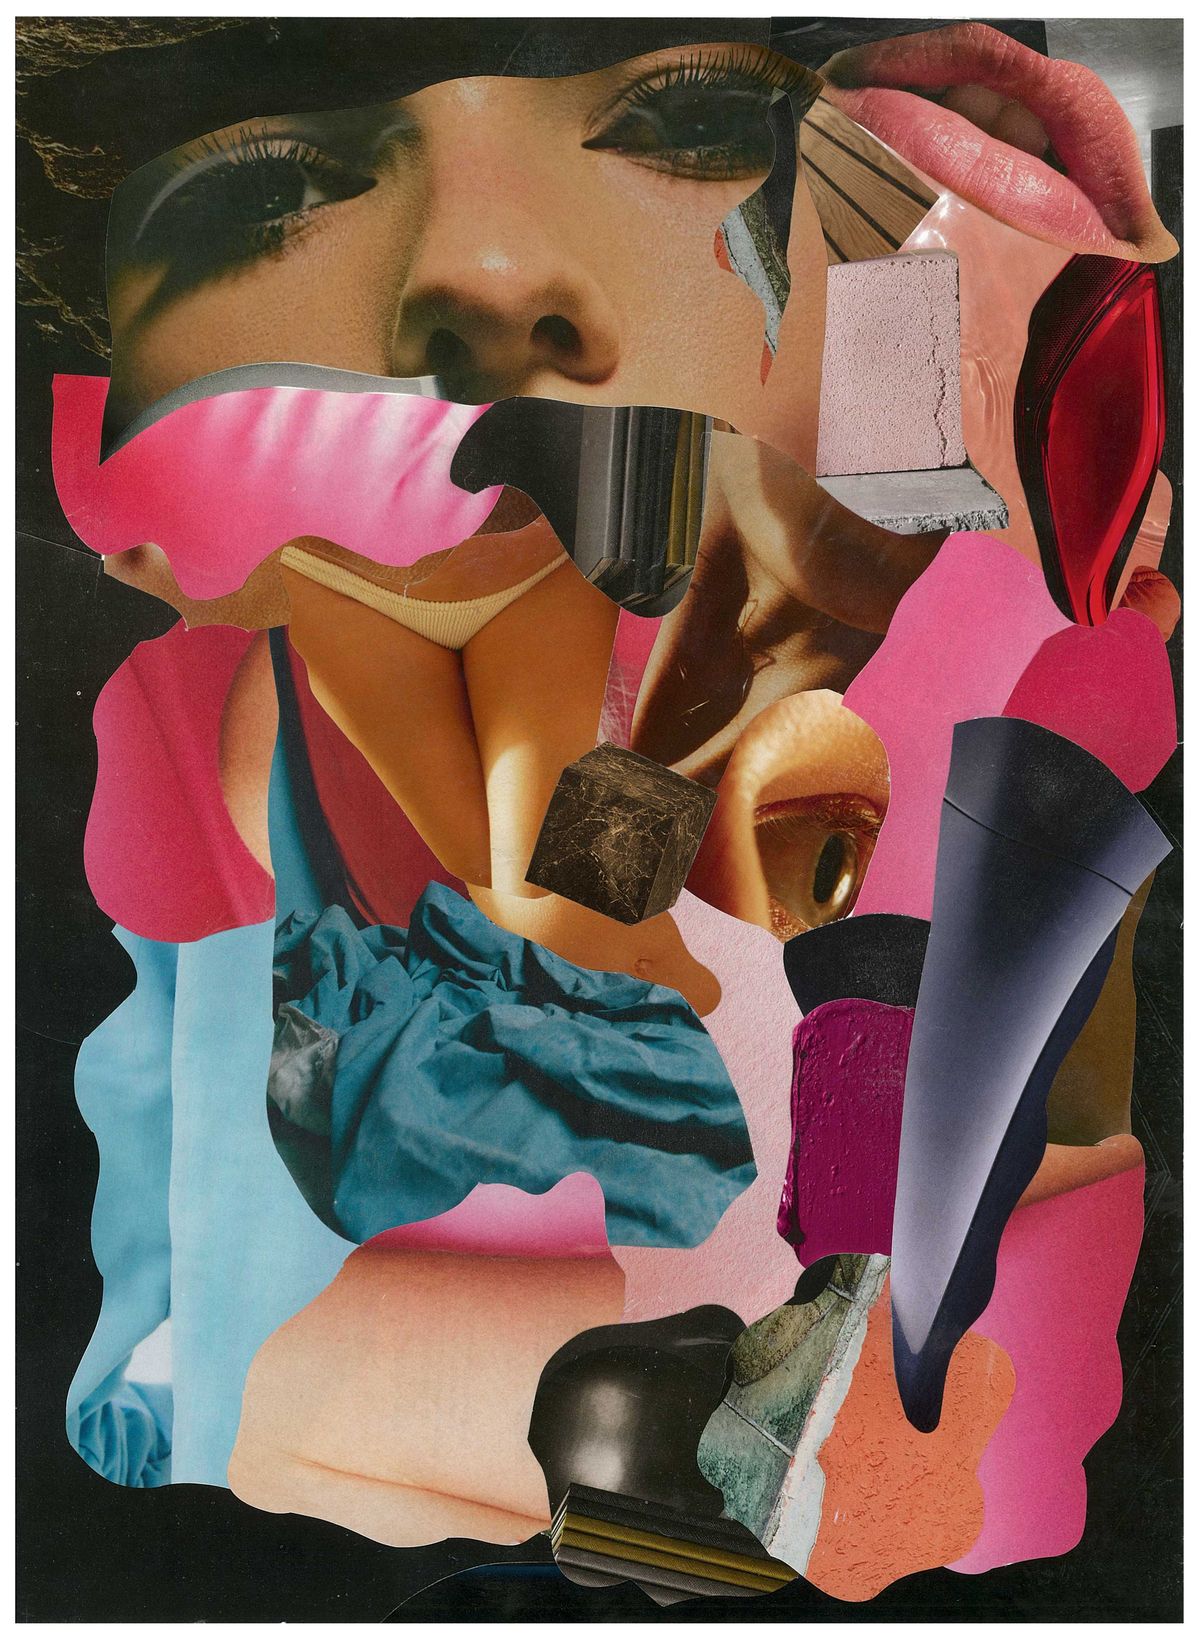 a collage of images of a woman's face and anatomy, fabric, and pigment